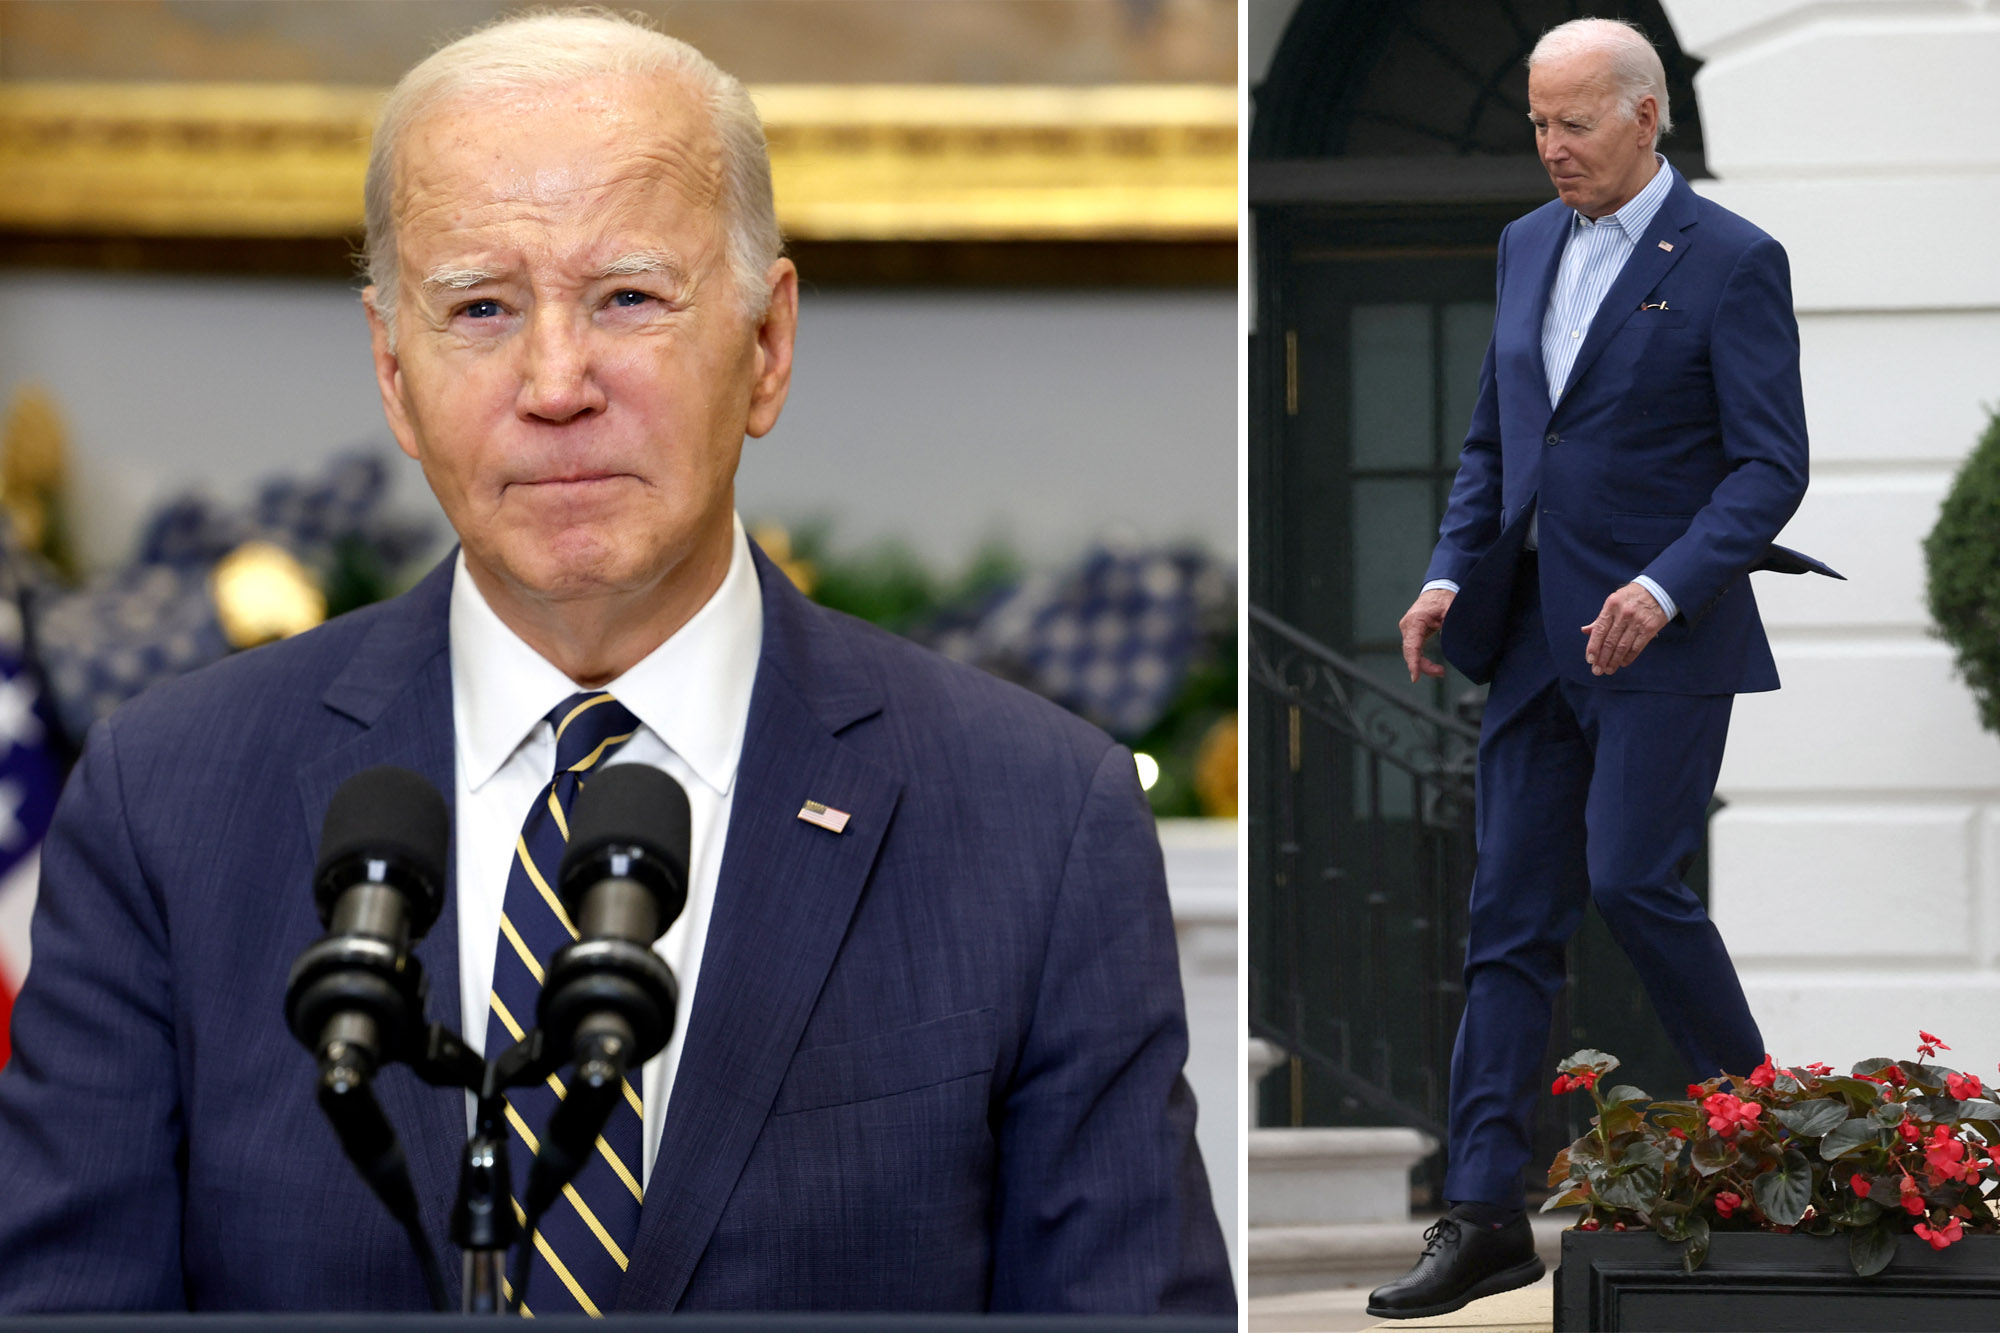 Biden showing signs of decline as pols, aides detail 81-year-old's slipping cognitive fitness: 'Not the same person'